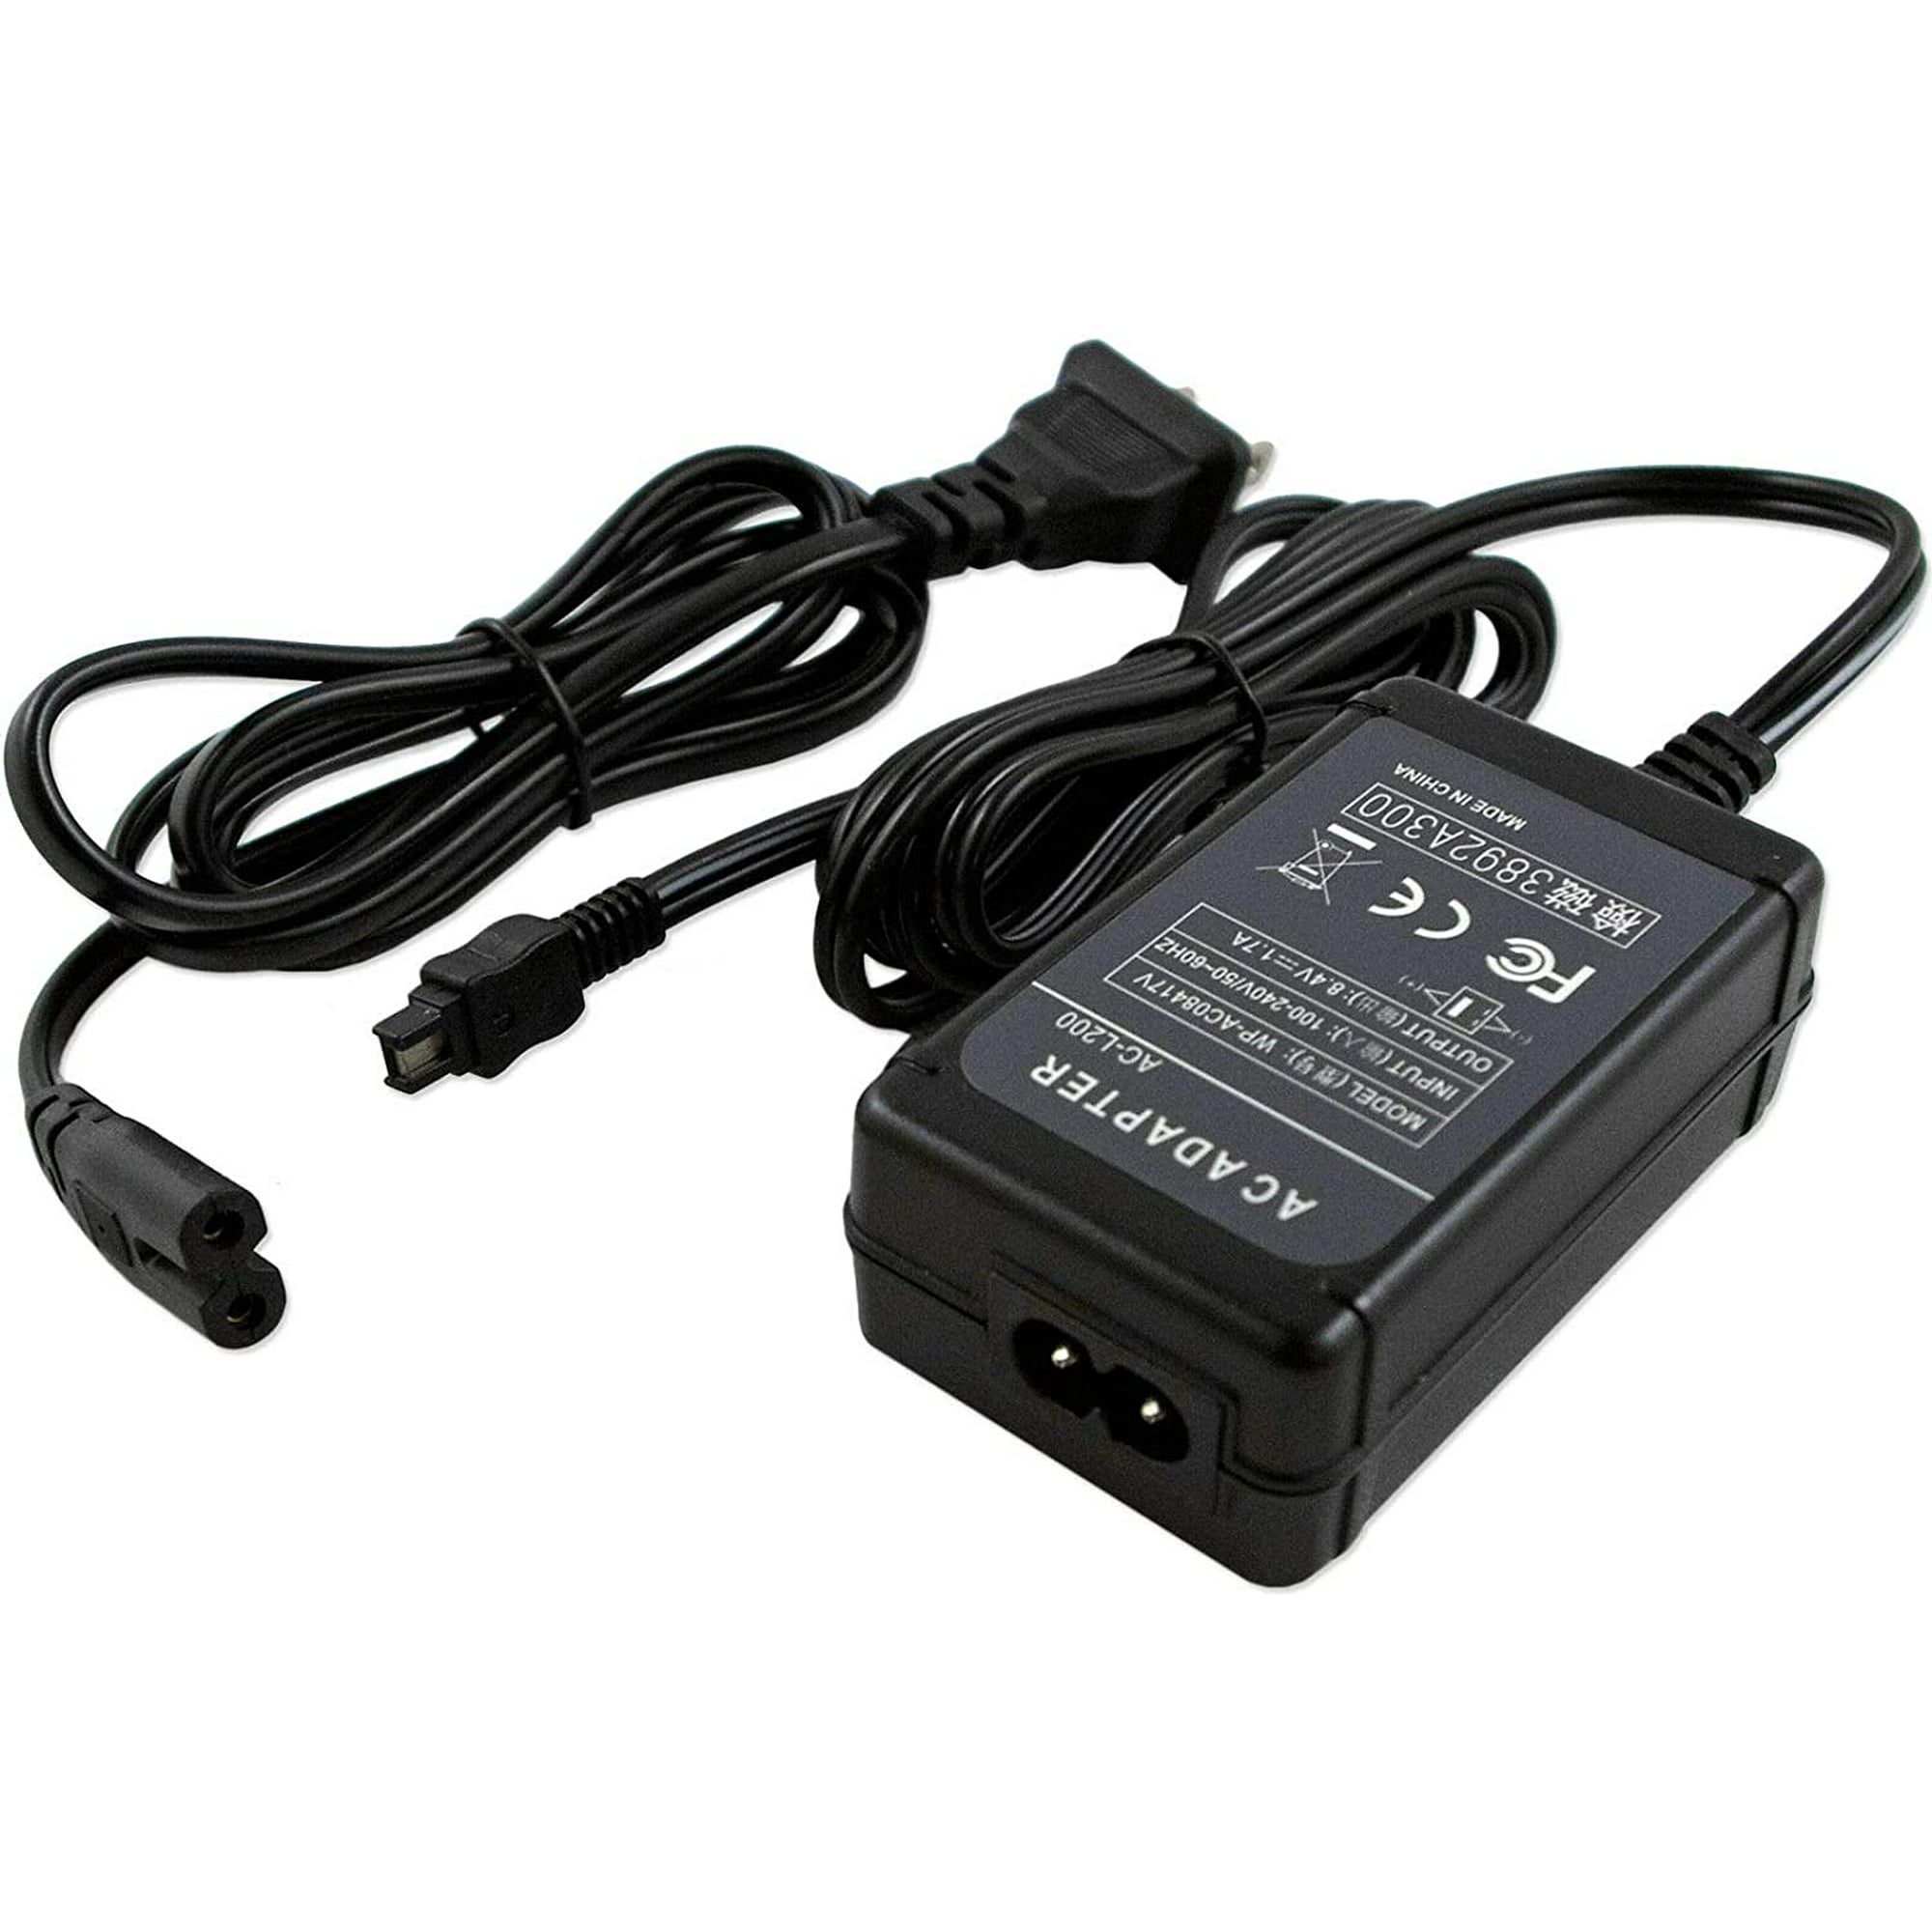 Yustda AC Power Supply Adapter Replacement for Sony HDR-CX630 HDR